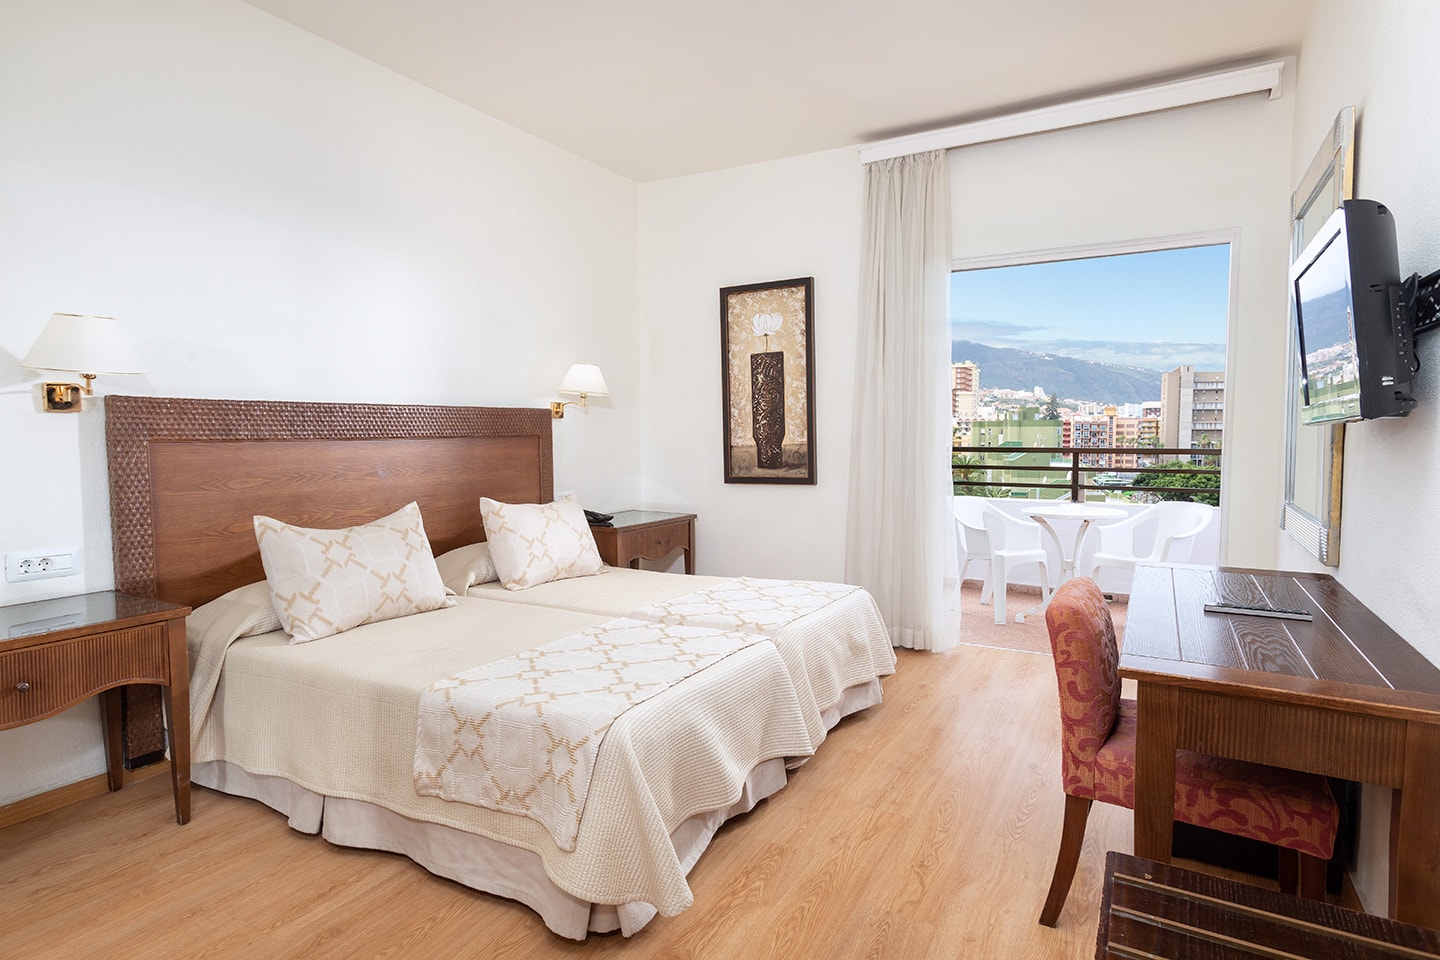 SUPERIOR ROOM WITH TEIDE VIEWS